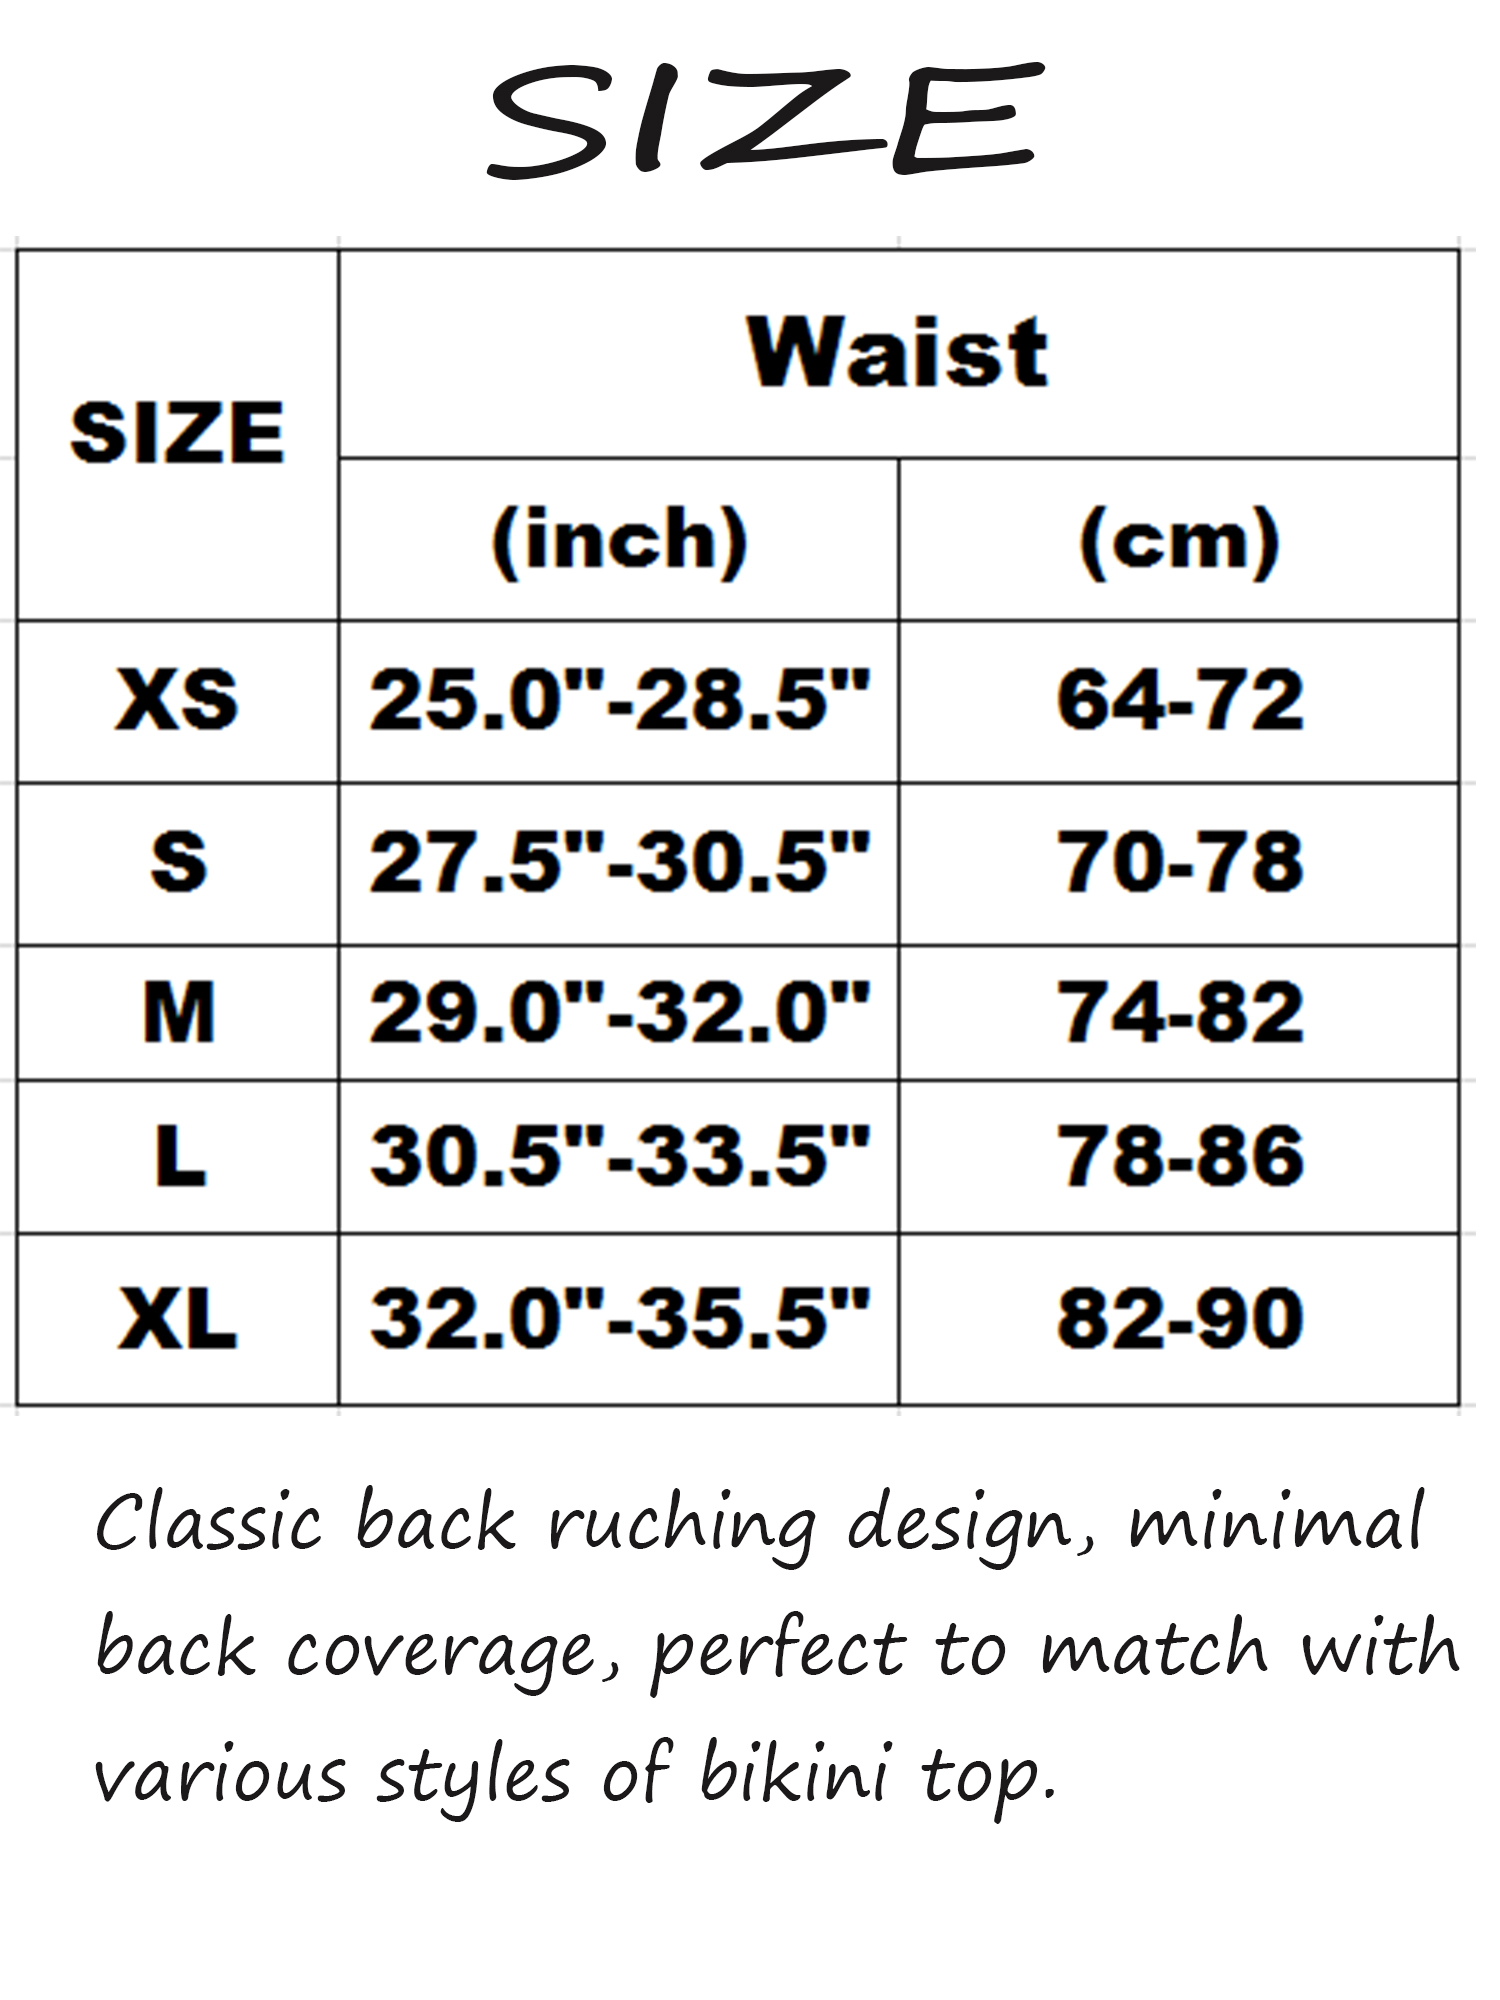 DODOING Women's Ruched Underwear Bikini Thong Bottom Sexy Bikini Bottom Thong Cheeky T-Back Booty Solid Classic Ruched Swimsuit - image 2 of 6